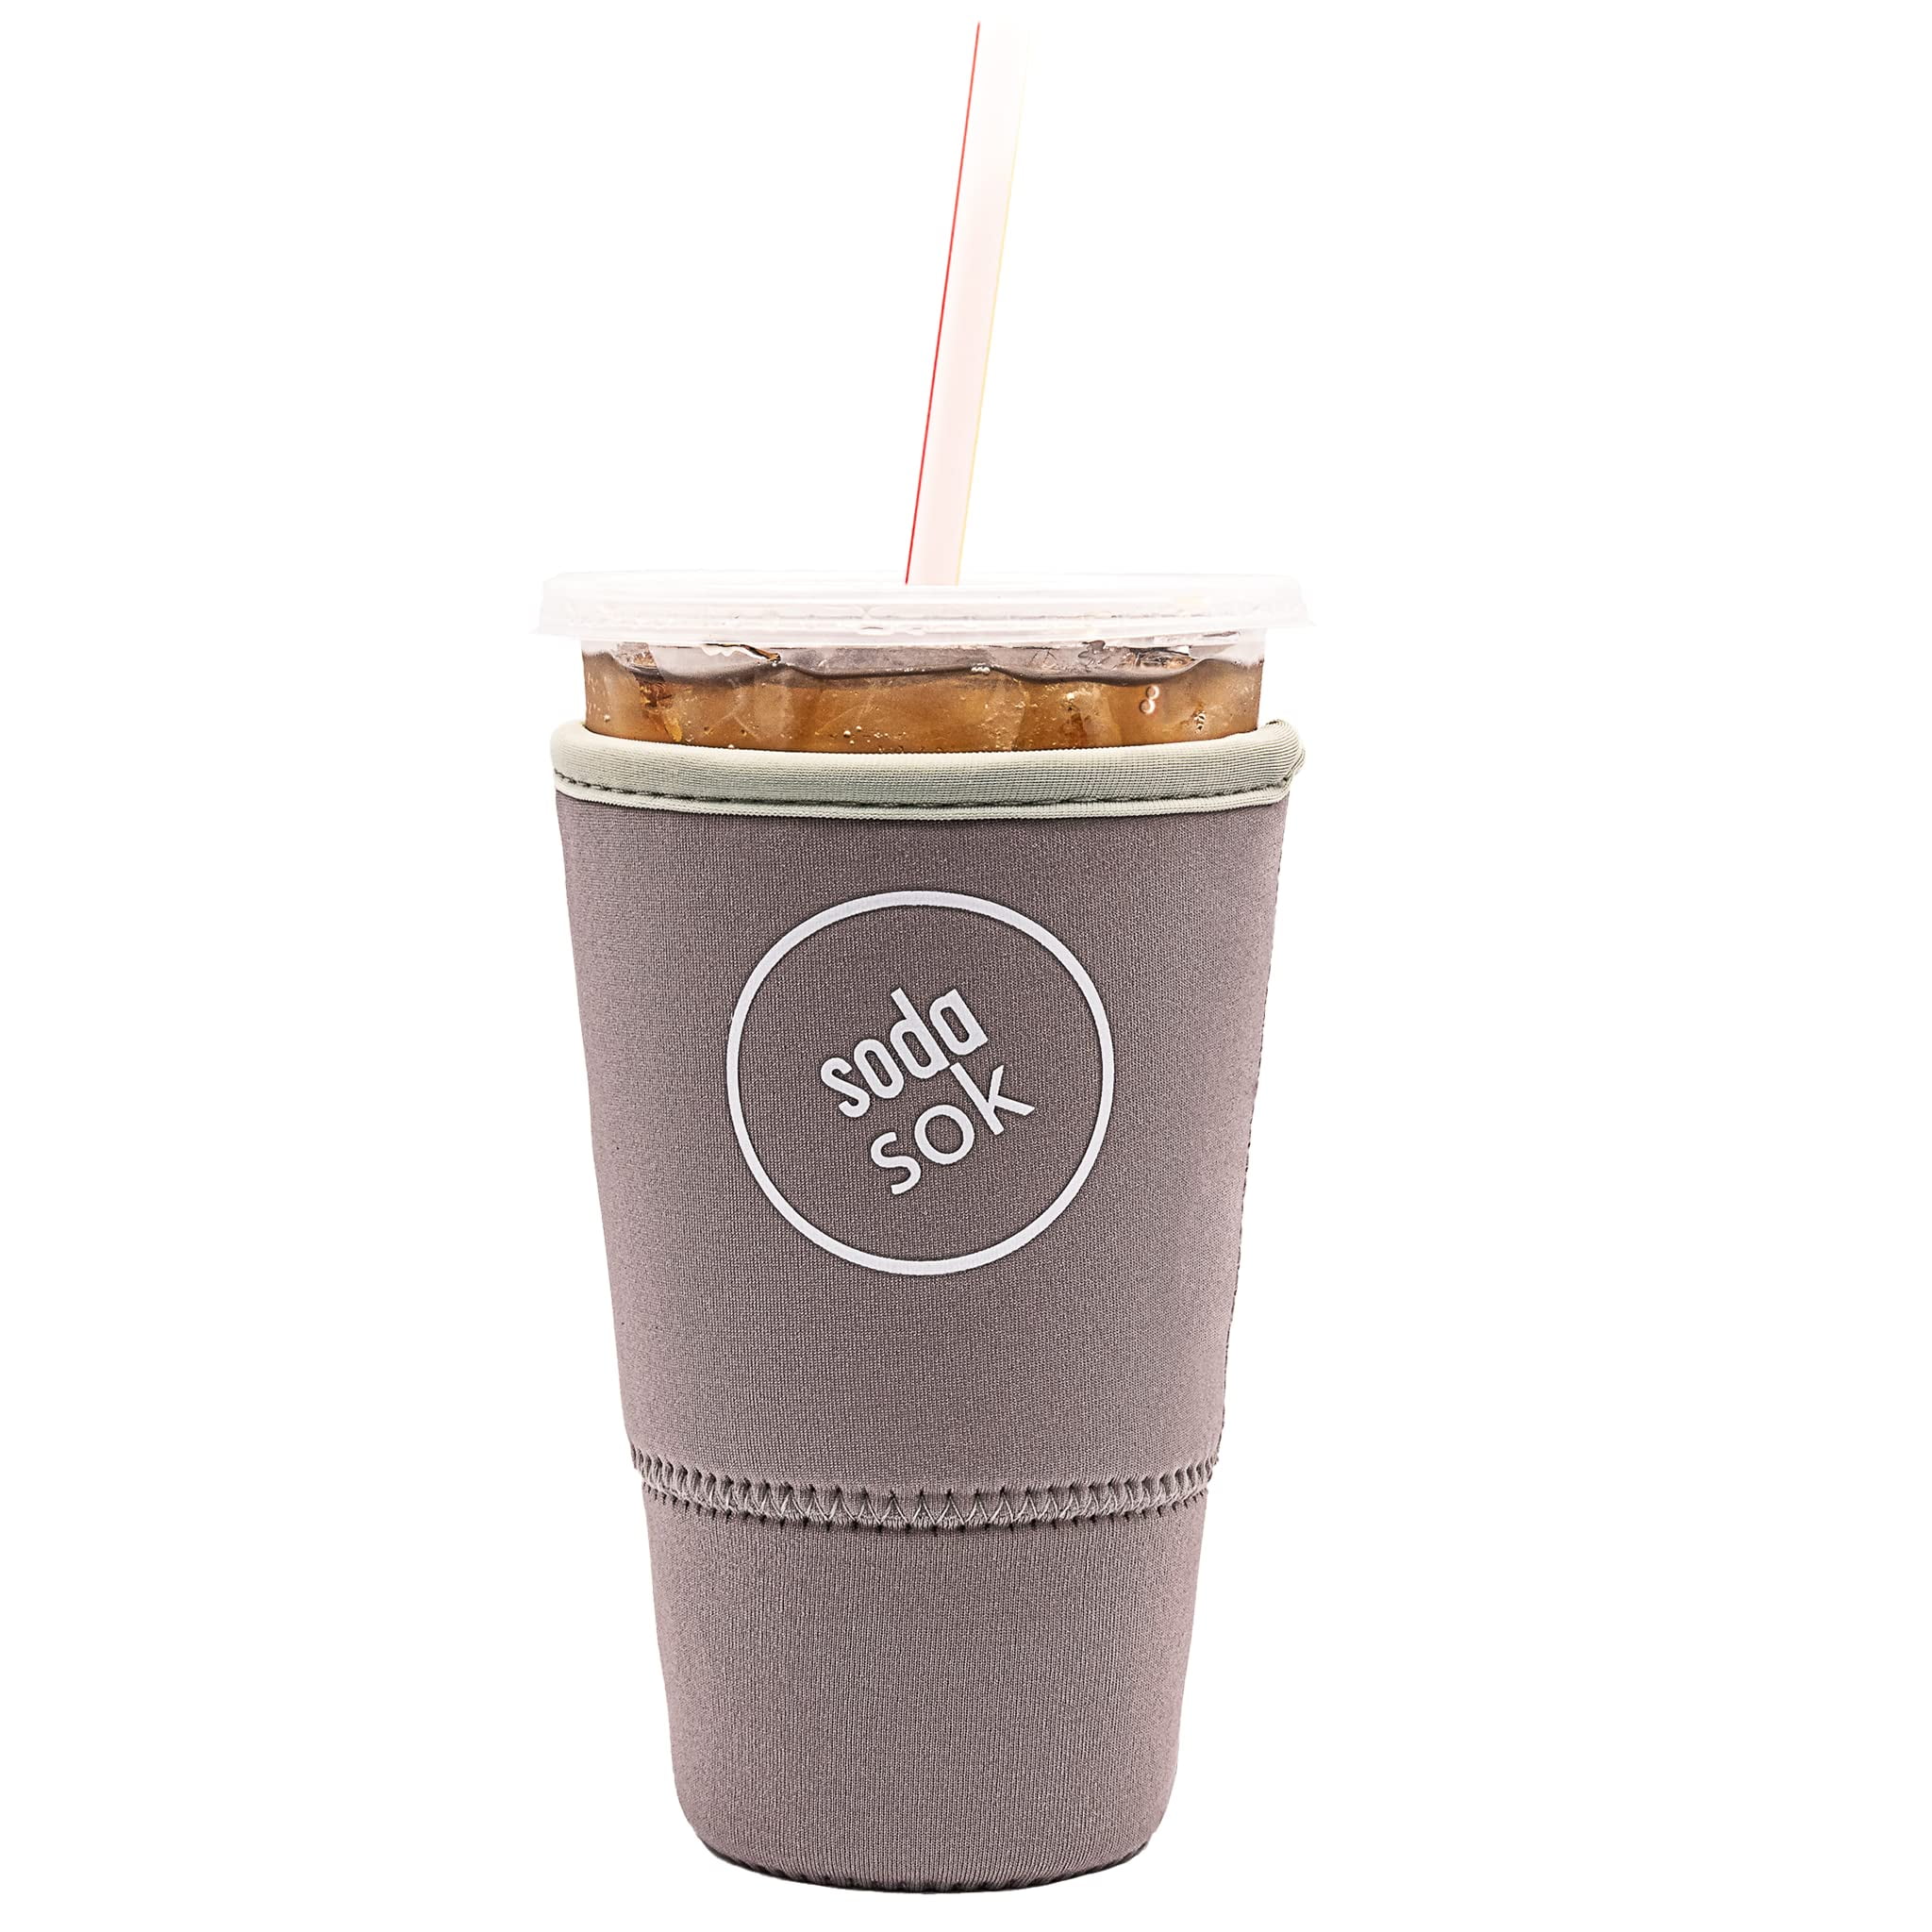 Fycyko Iced Coffee Sleeves Reusable Insulator for Cold& Hot Drink Cups-3 Pack(30-32 oz) Love Heart Cute Neoprene Iced Coffee Cup Sleeve,Compatible